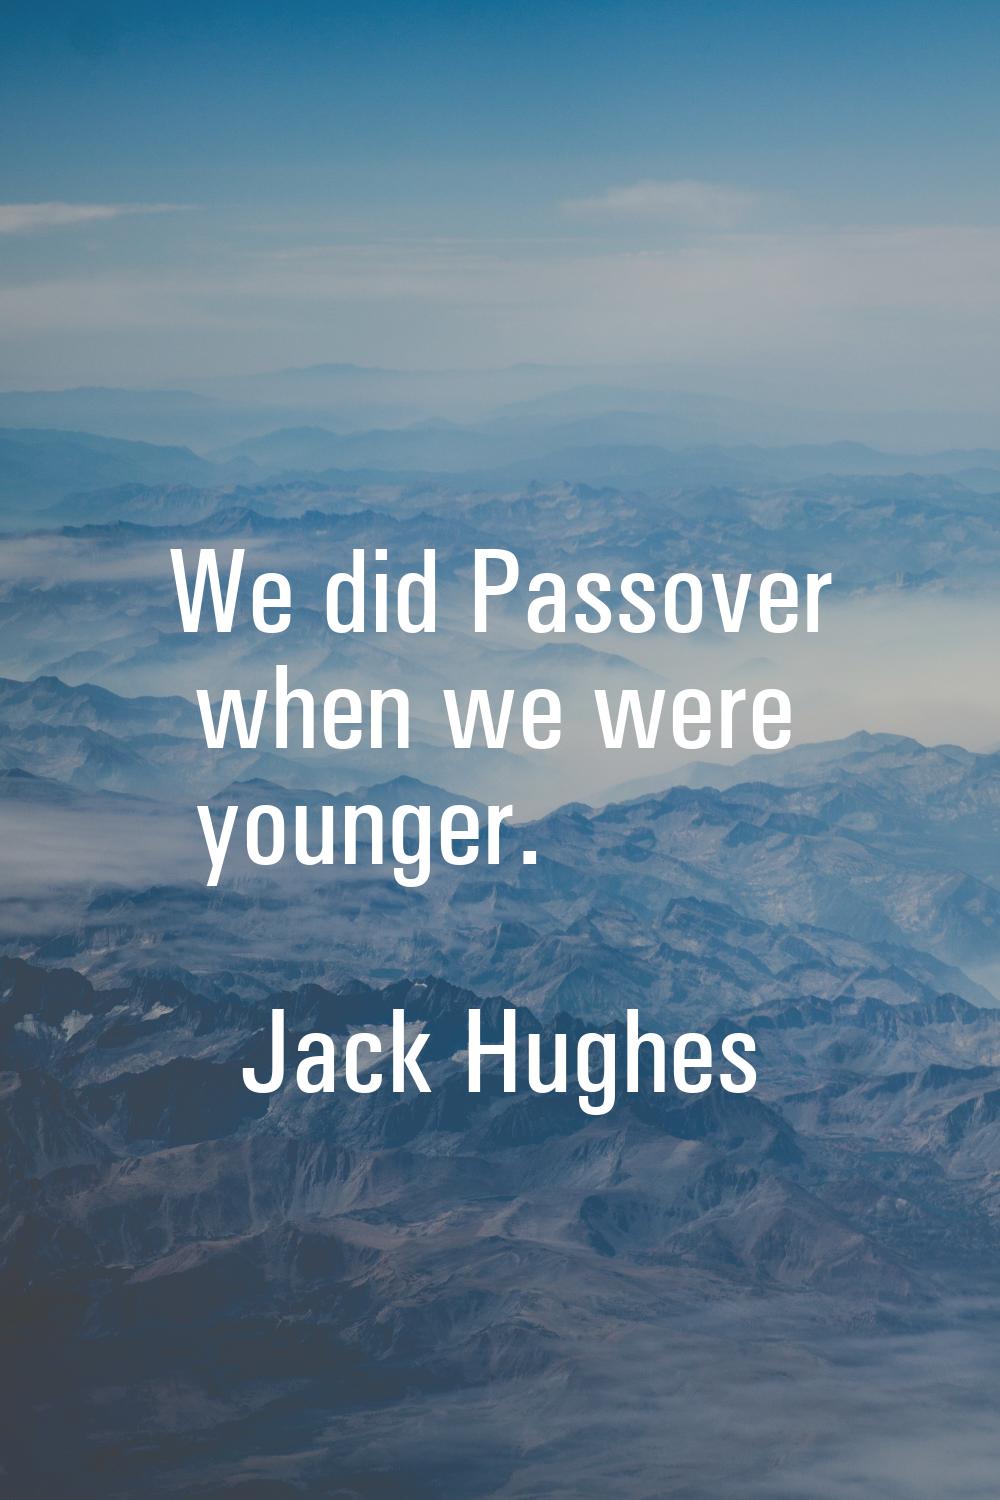 We did Passover when we were younger.